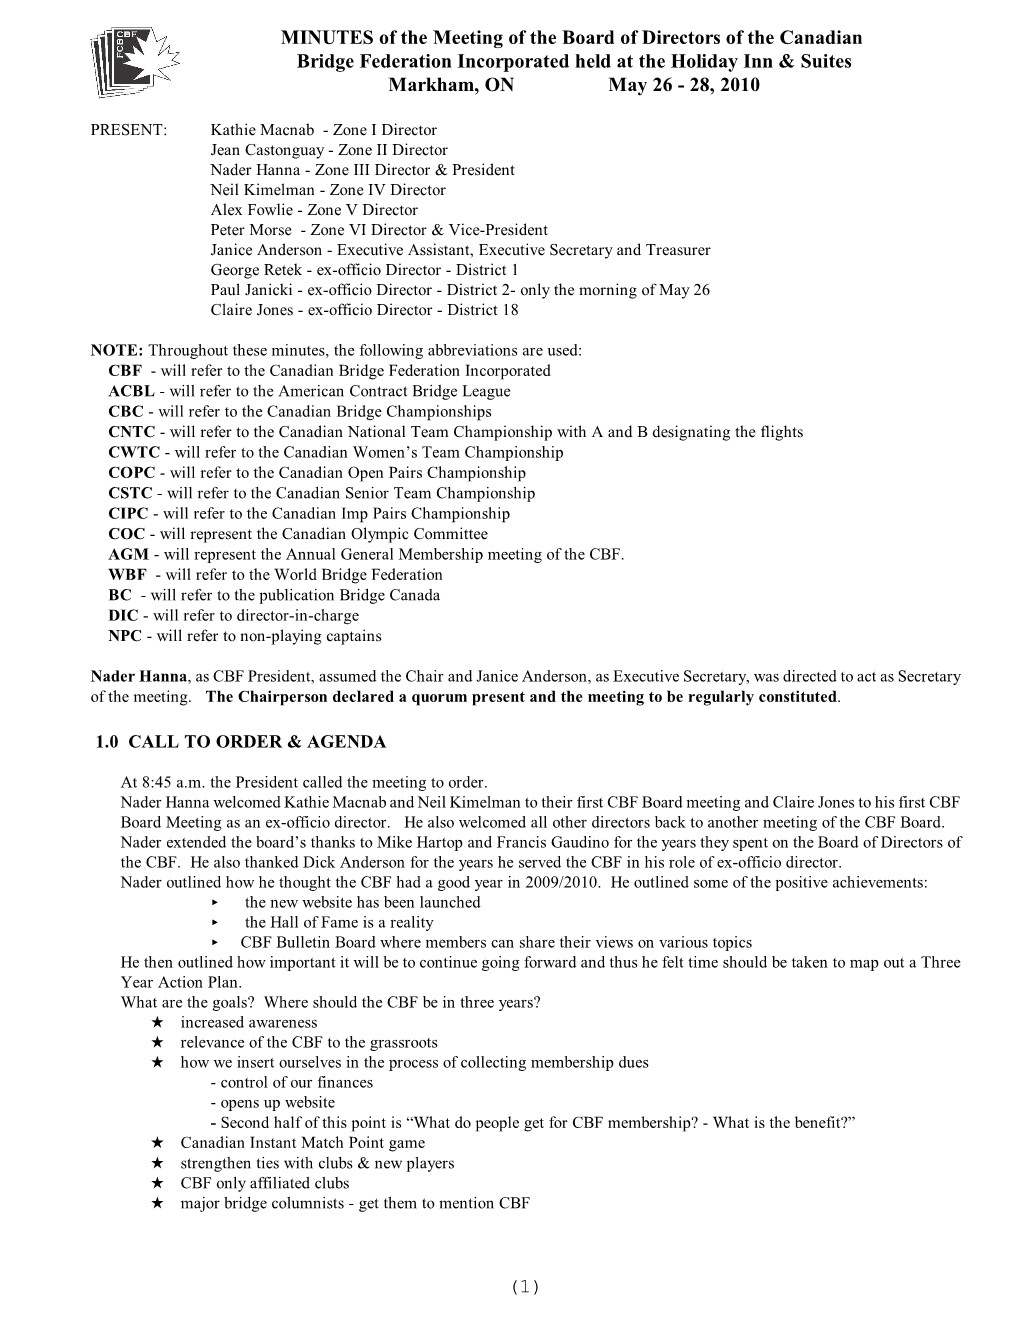 MINUTES of the Meeting of the Board of Directors of the Canadian Bridge Federation Incorporated Held at the Holiday Inn & Suites Markham, on May 26 - 28, 2010